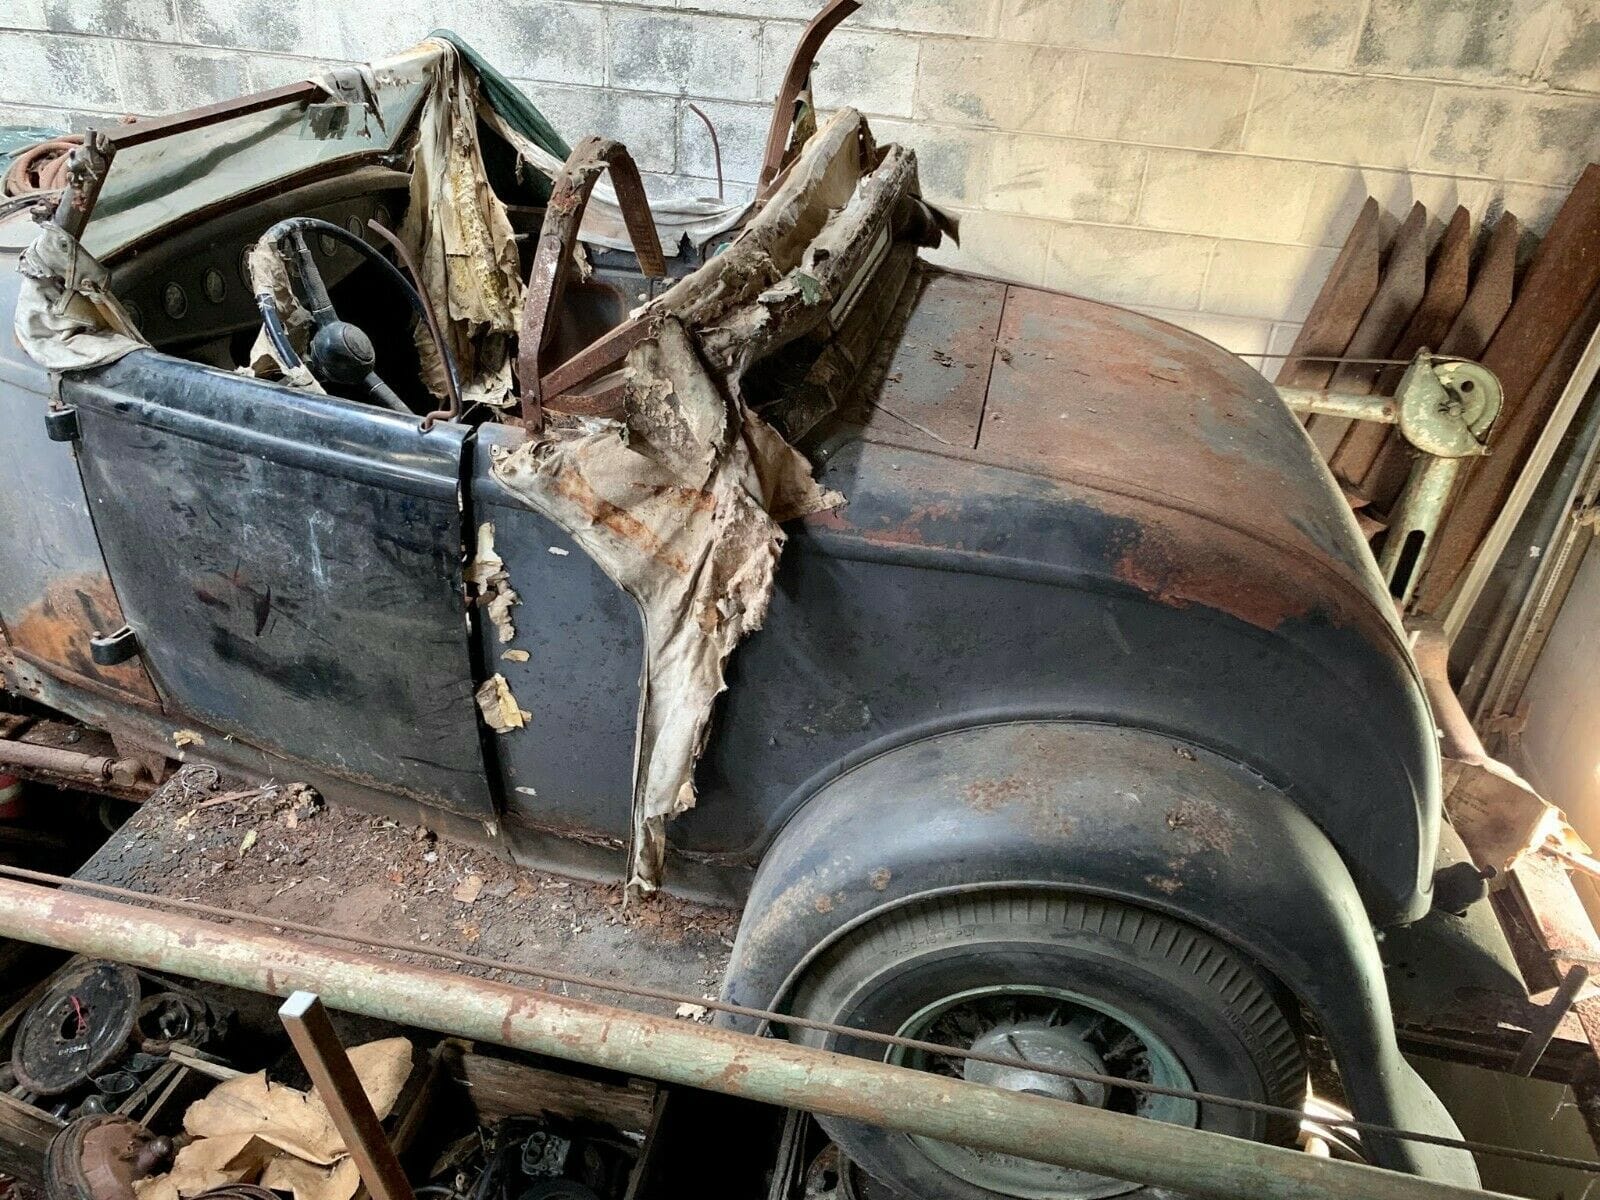 Tips for Uncovering and Purchasing Barn Find Cars